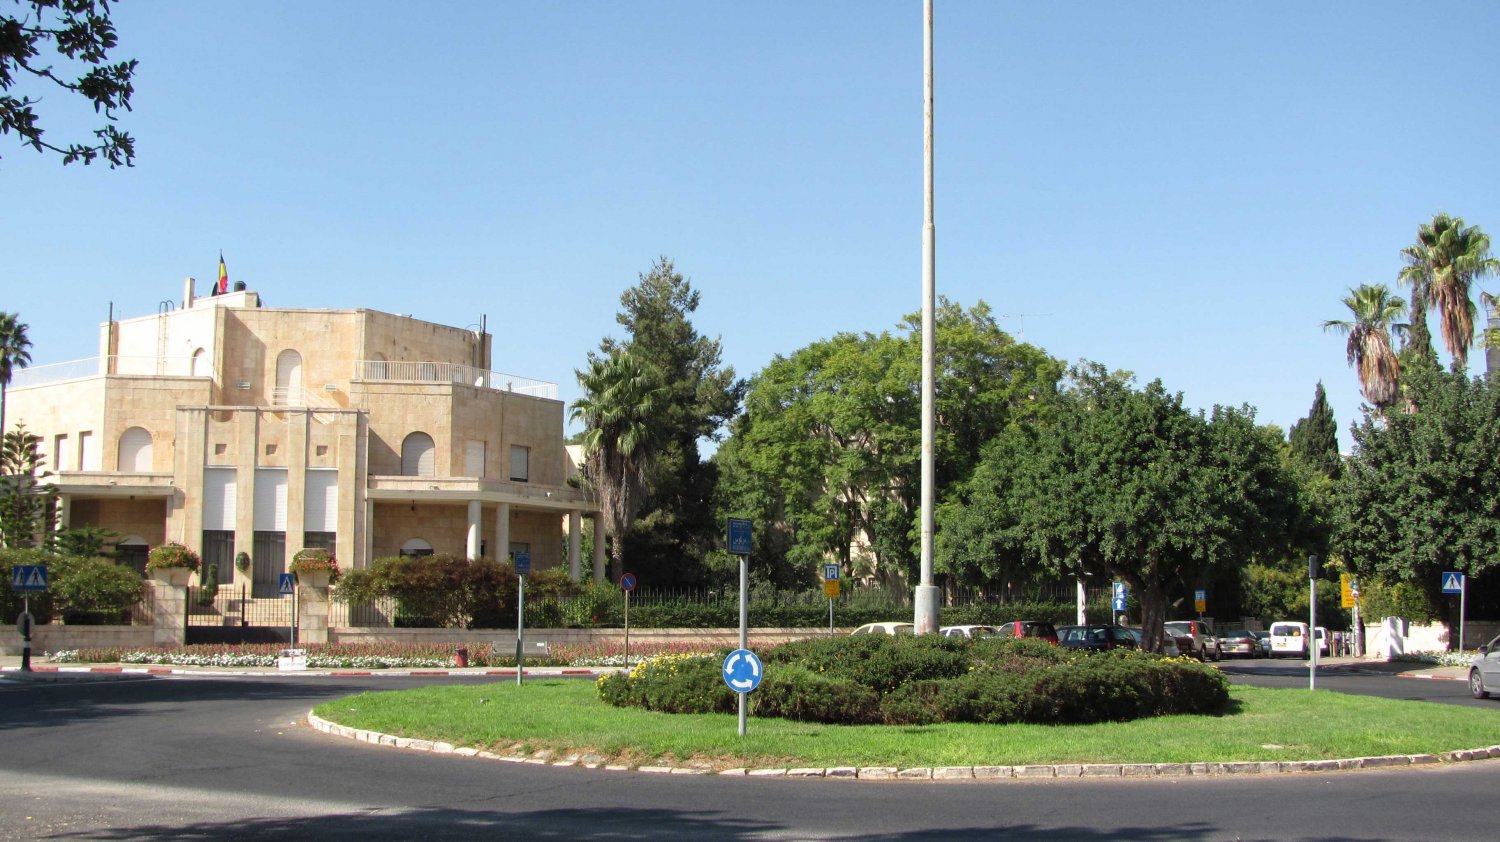 “Orde Wingate Square” is across from Villa Salameh, 2012